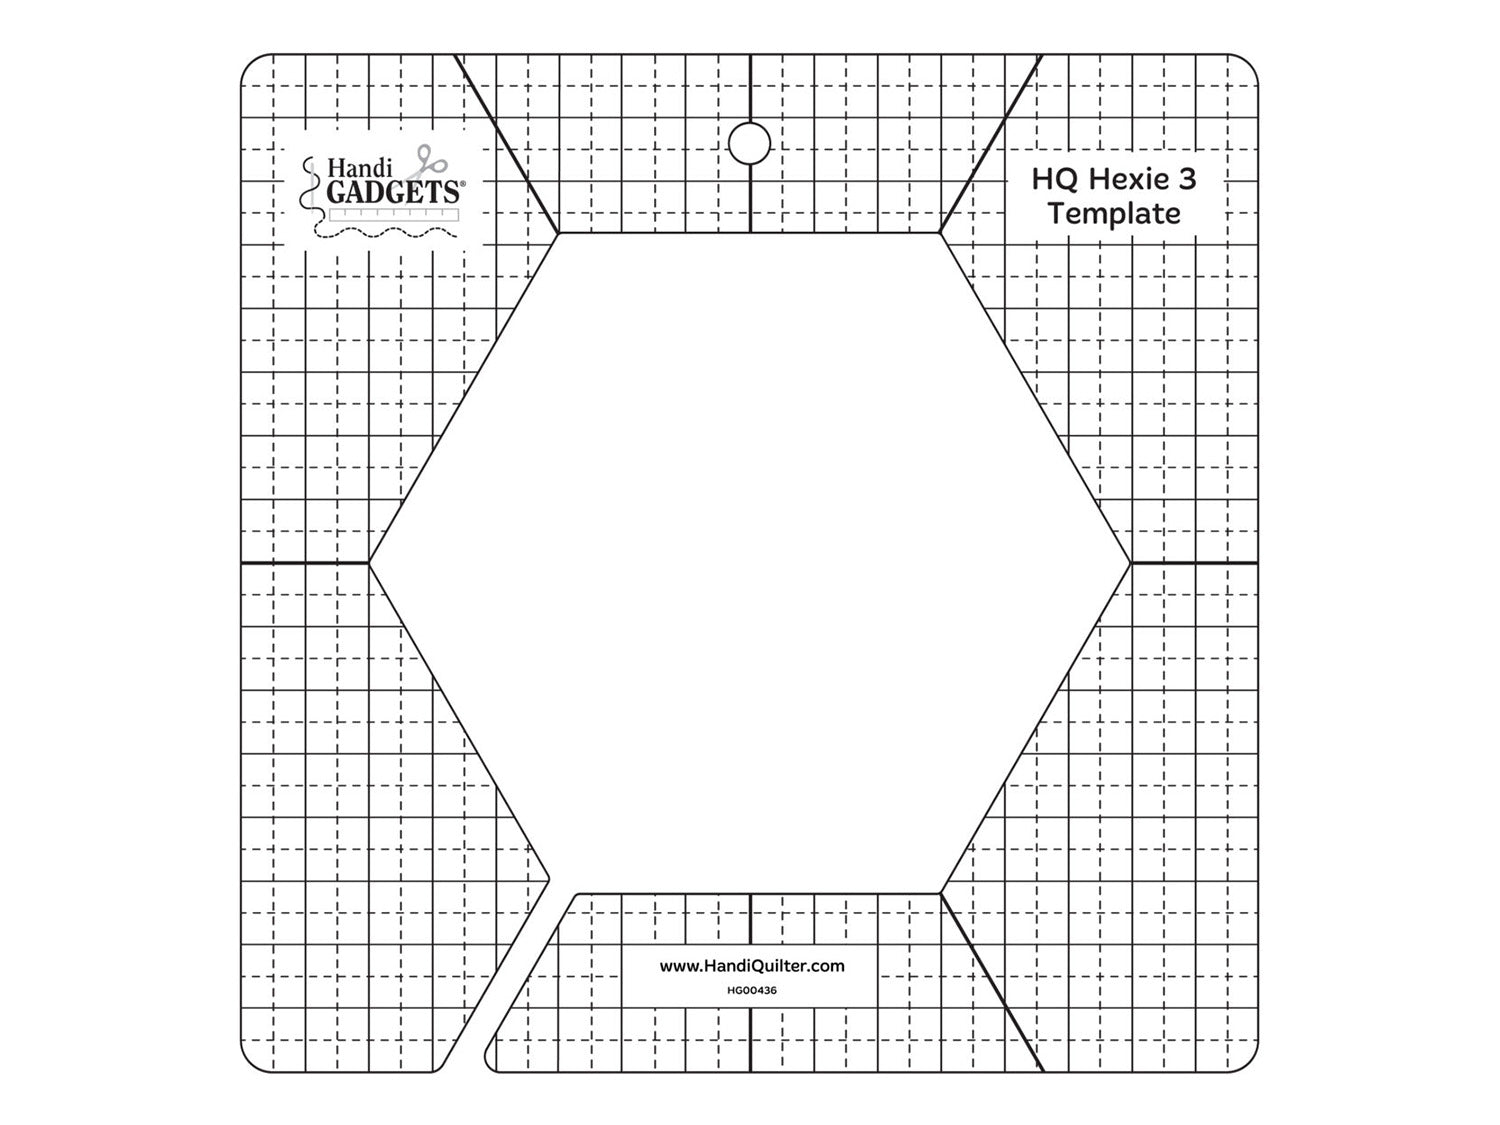 HQ Hexie 3 Template Quilting Ruler